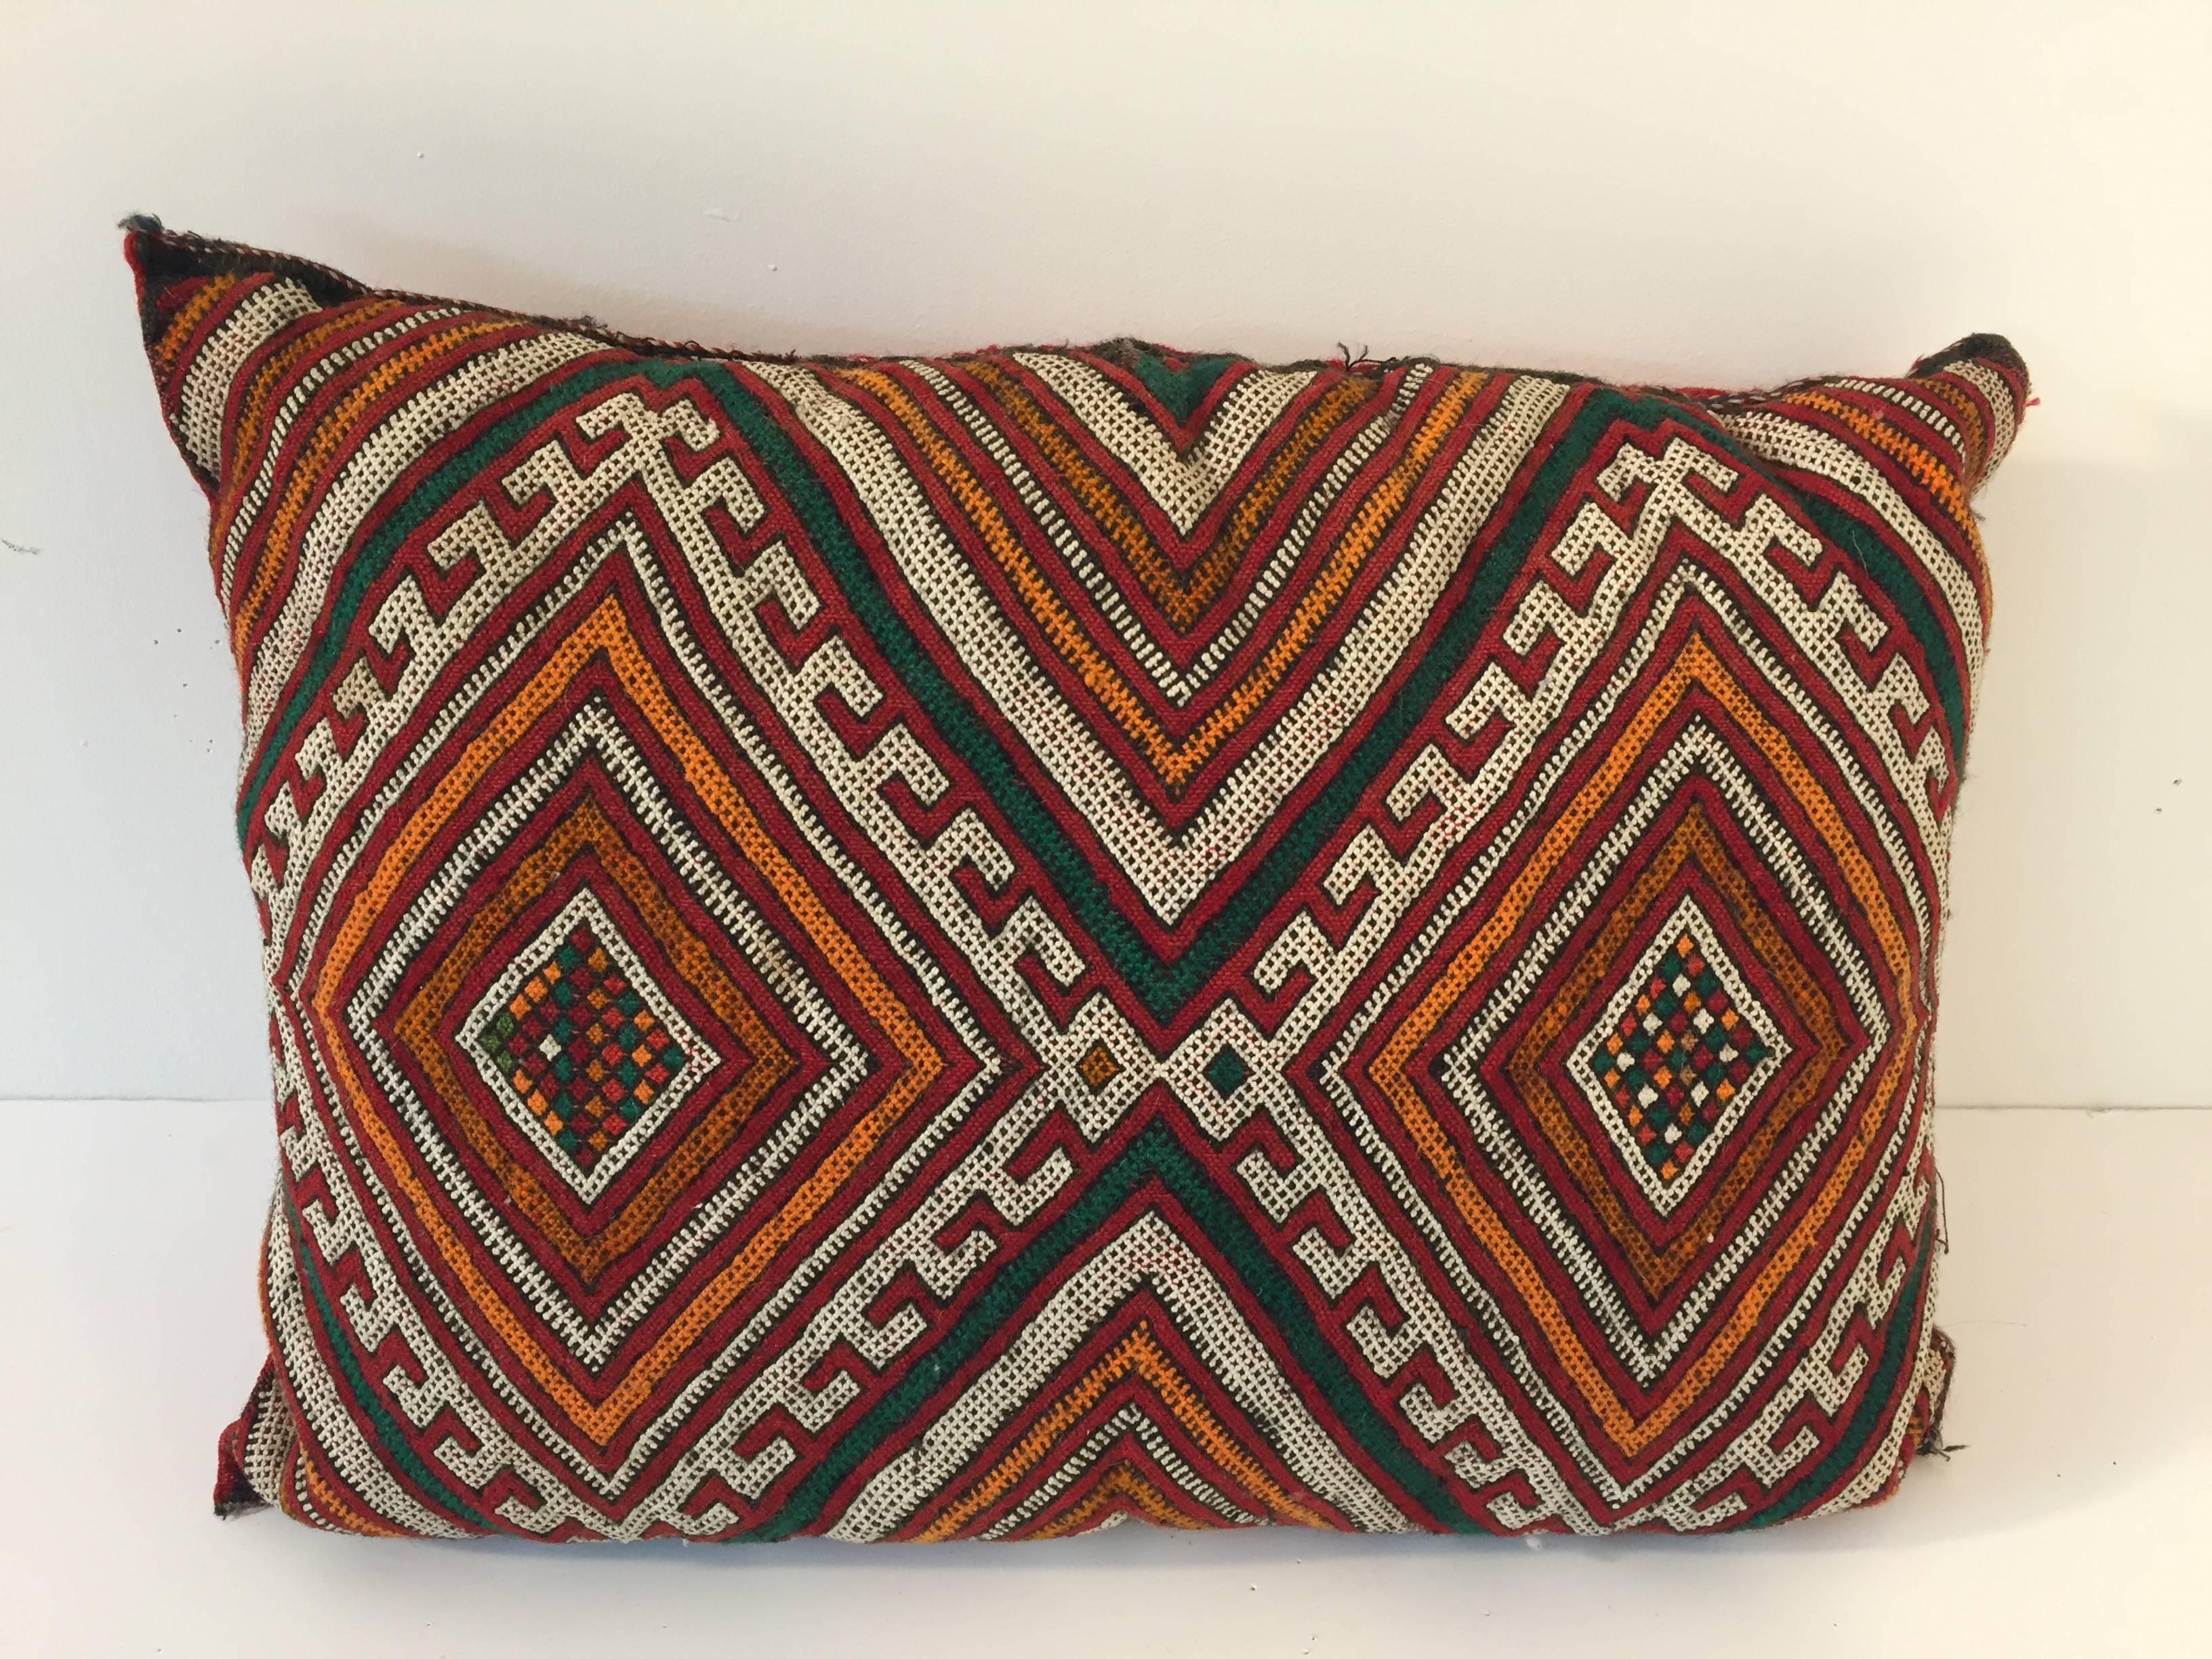 Moroccan Berber pillow red with geometric tribal designs.
Handwoven tribal throw pillow made from a vintage flat-weave rug.
The front and the back are made from a different rug, front is more elaborate and back is red with stripes.
Handwoven by